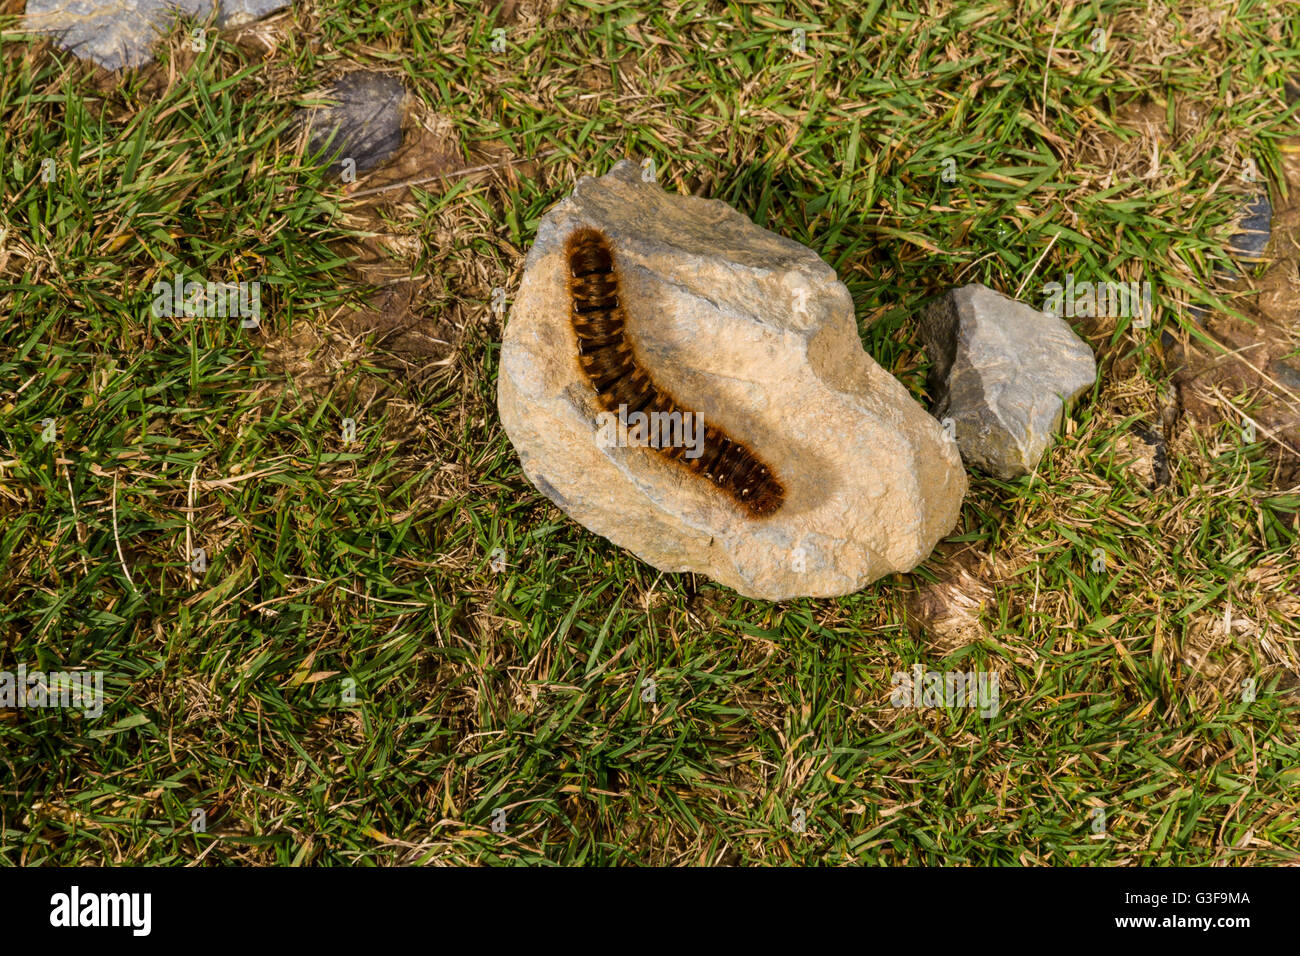 Hairy brown large caterpillar in the UK basking on a stone. Oag eggar or Lasiocampa quercus member of the Lasiocampidae family Stock Photo